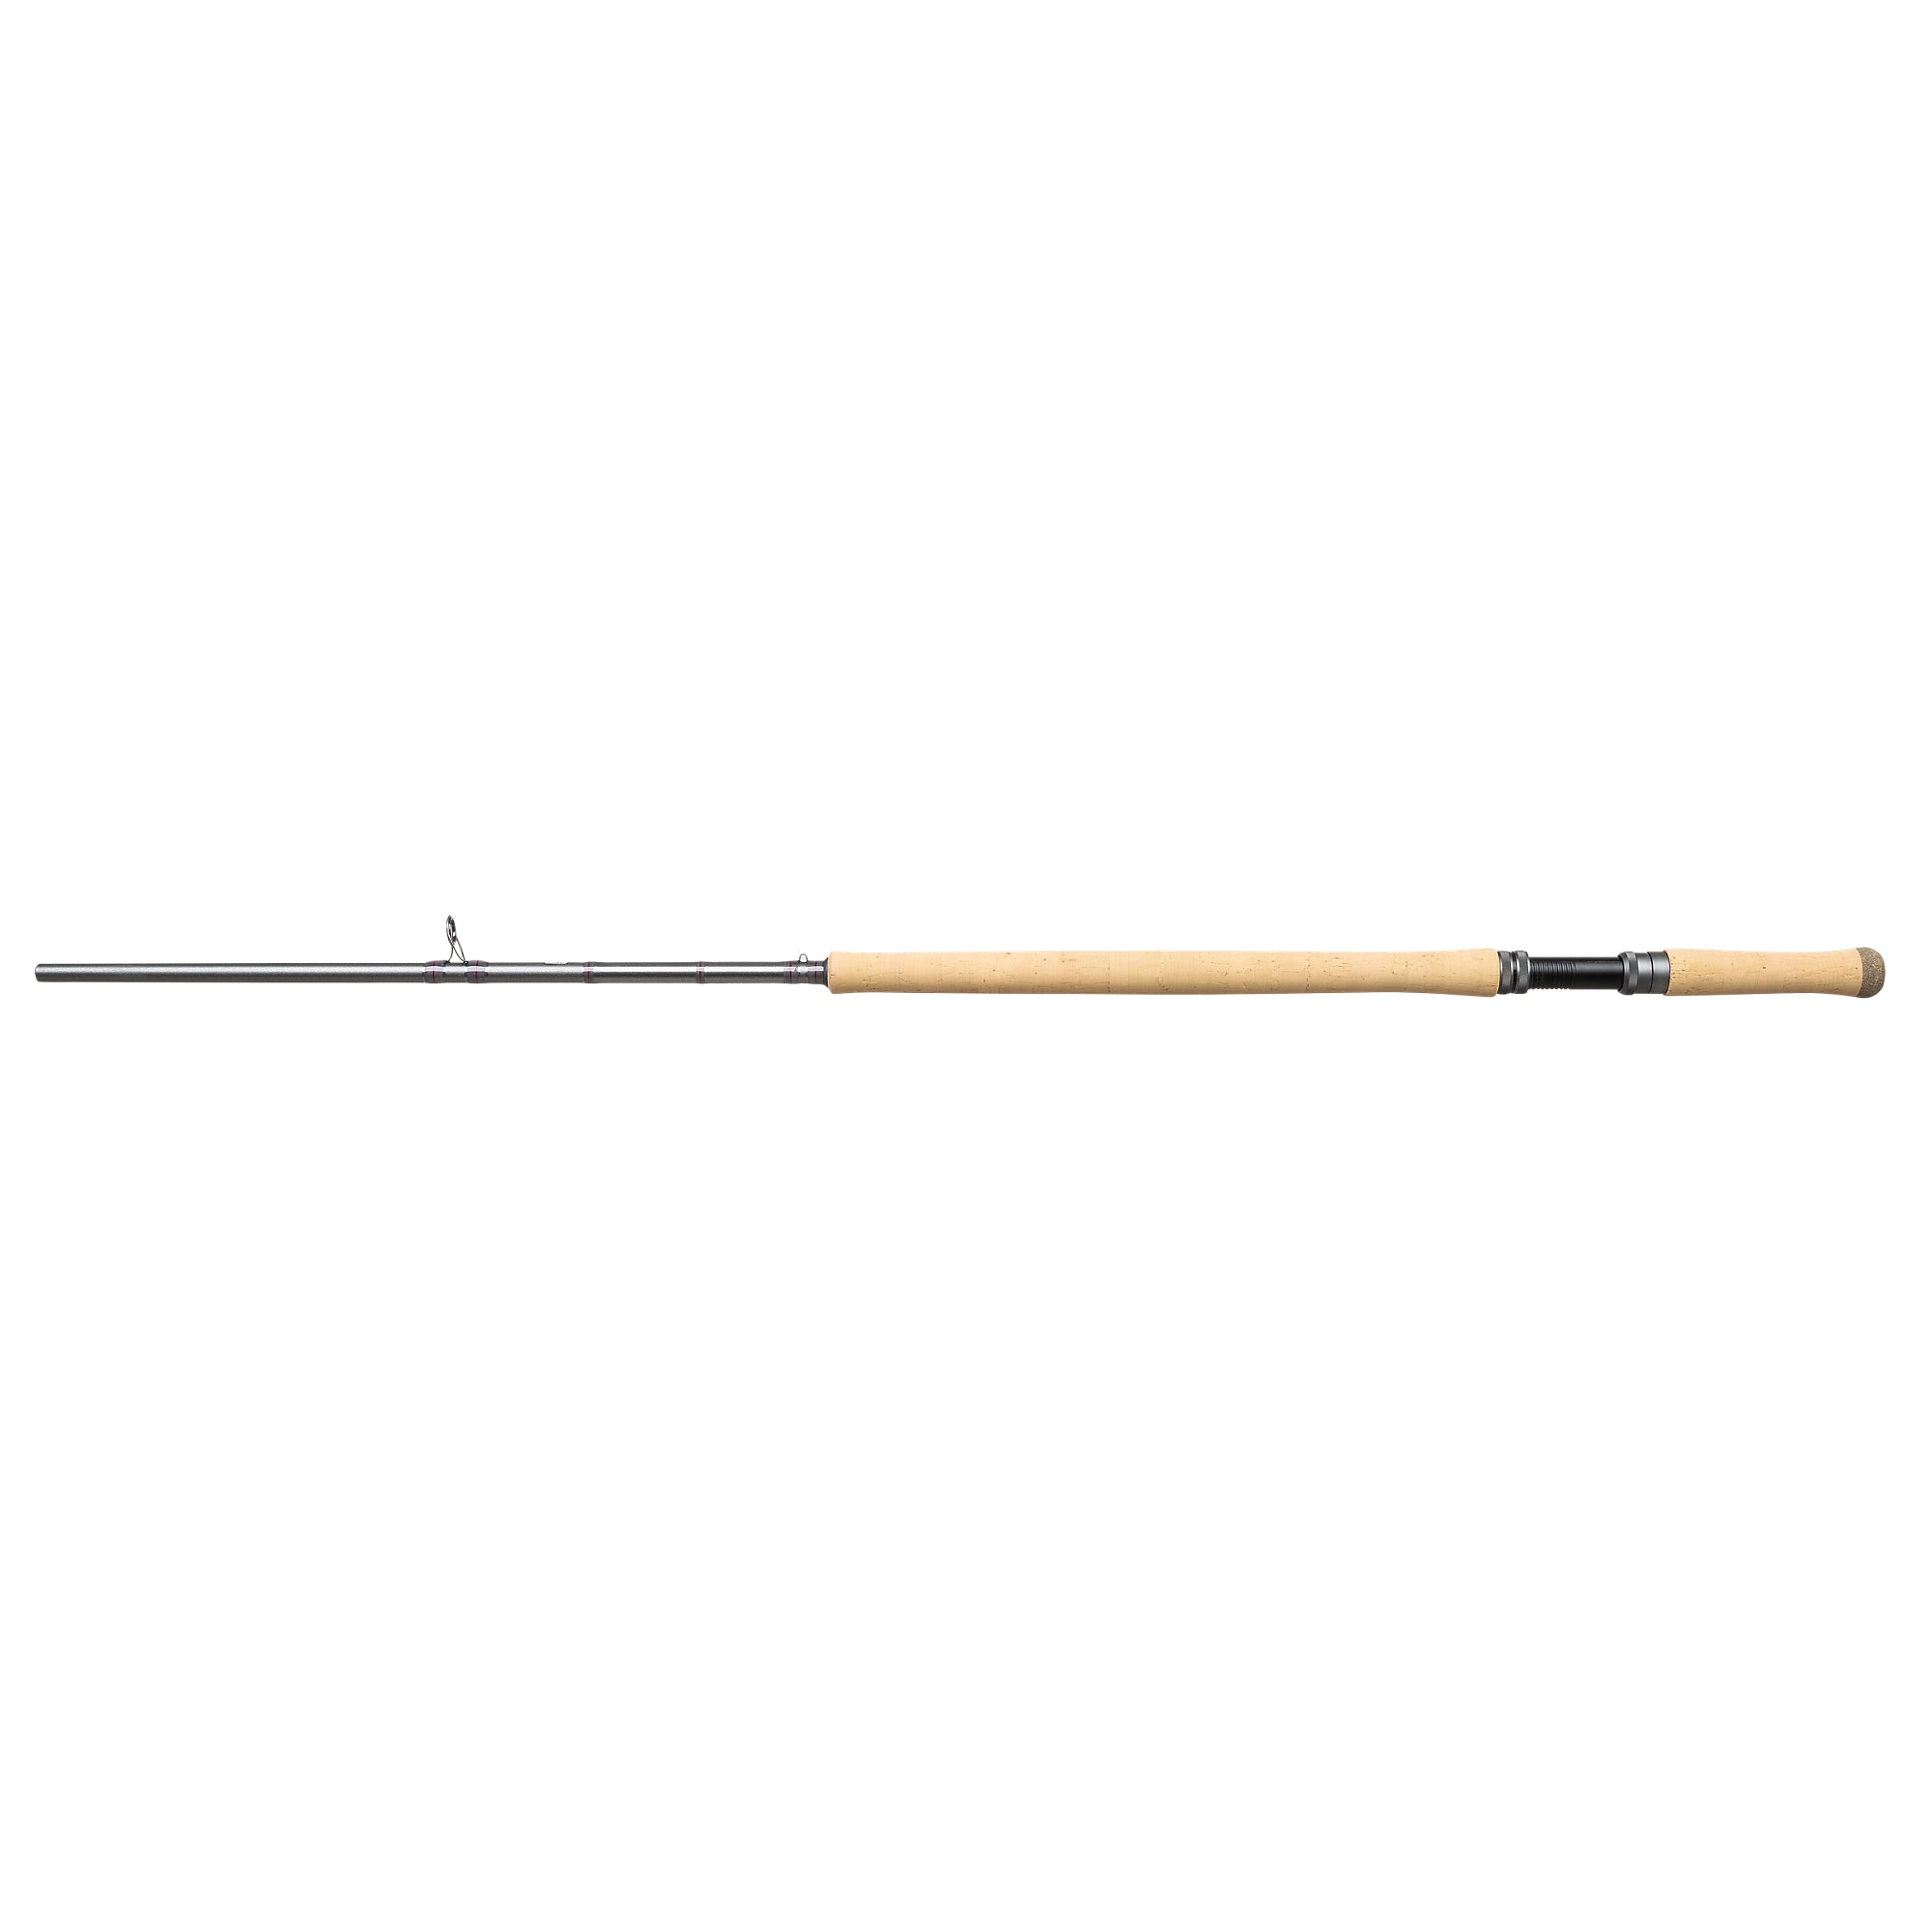 SHAKESPEARE ORACLE 2 SPEY SALMON DH FLY RODS